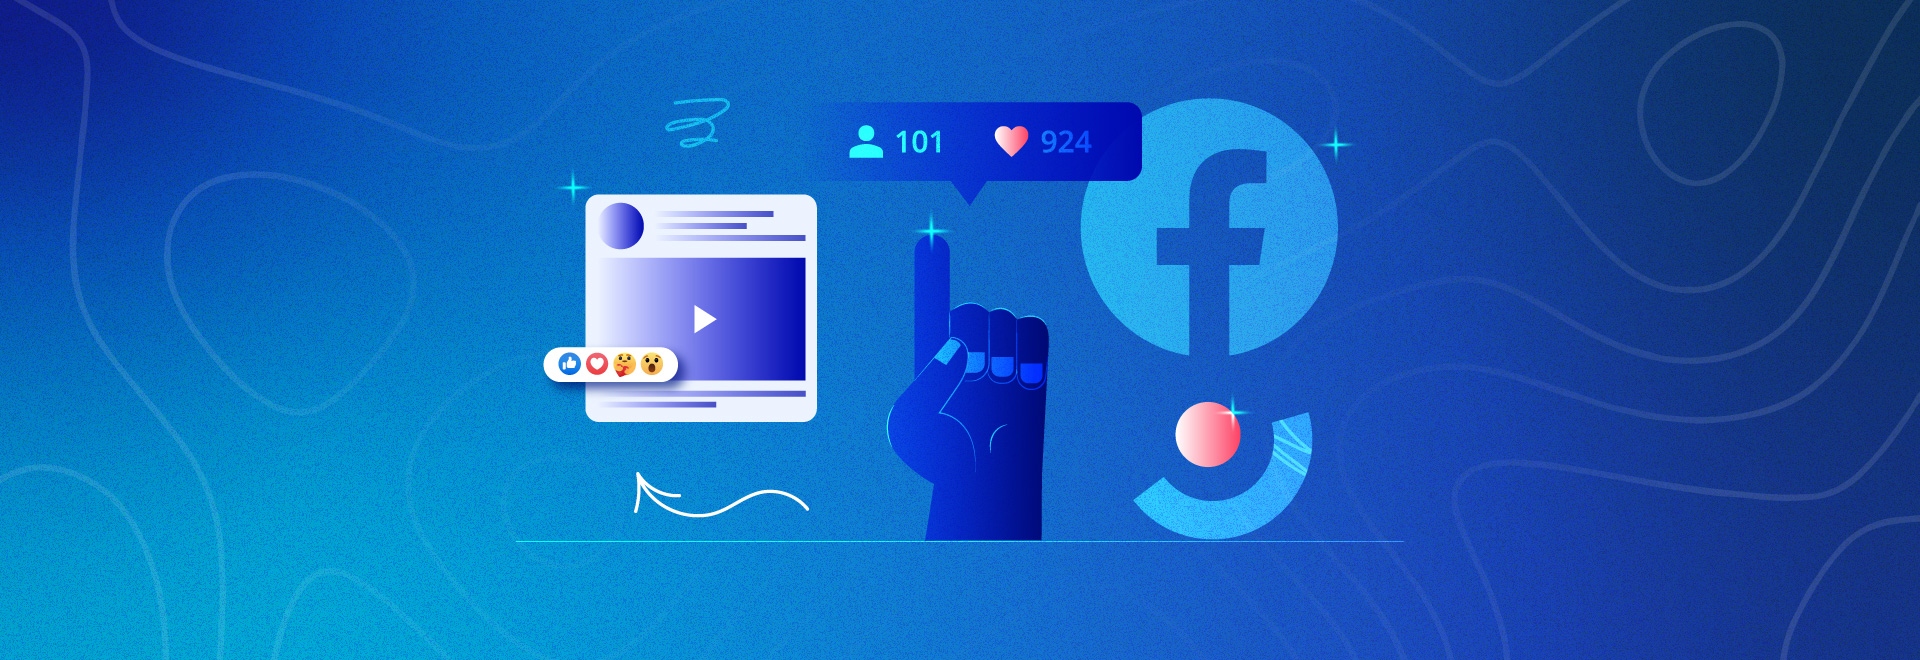 Maximising Your Social Media Engagement: 10 Proven Tips for Facebook